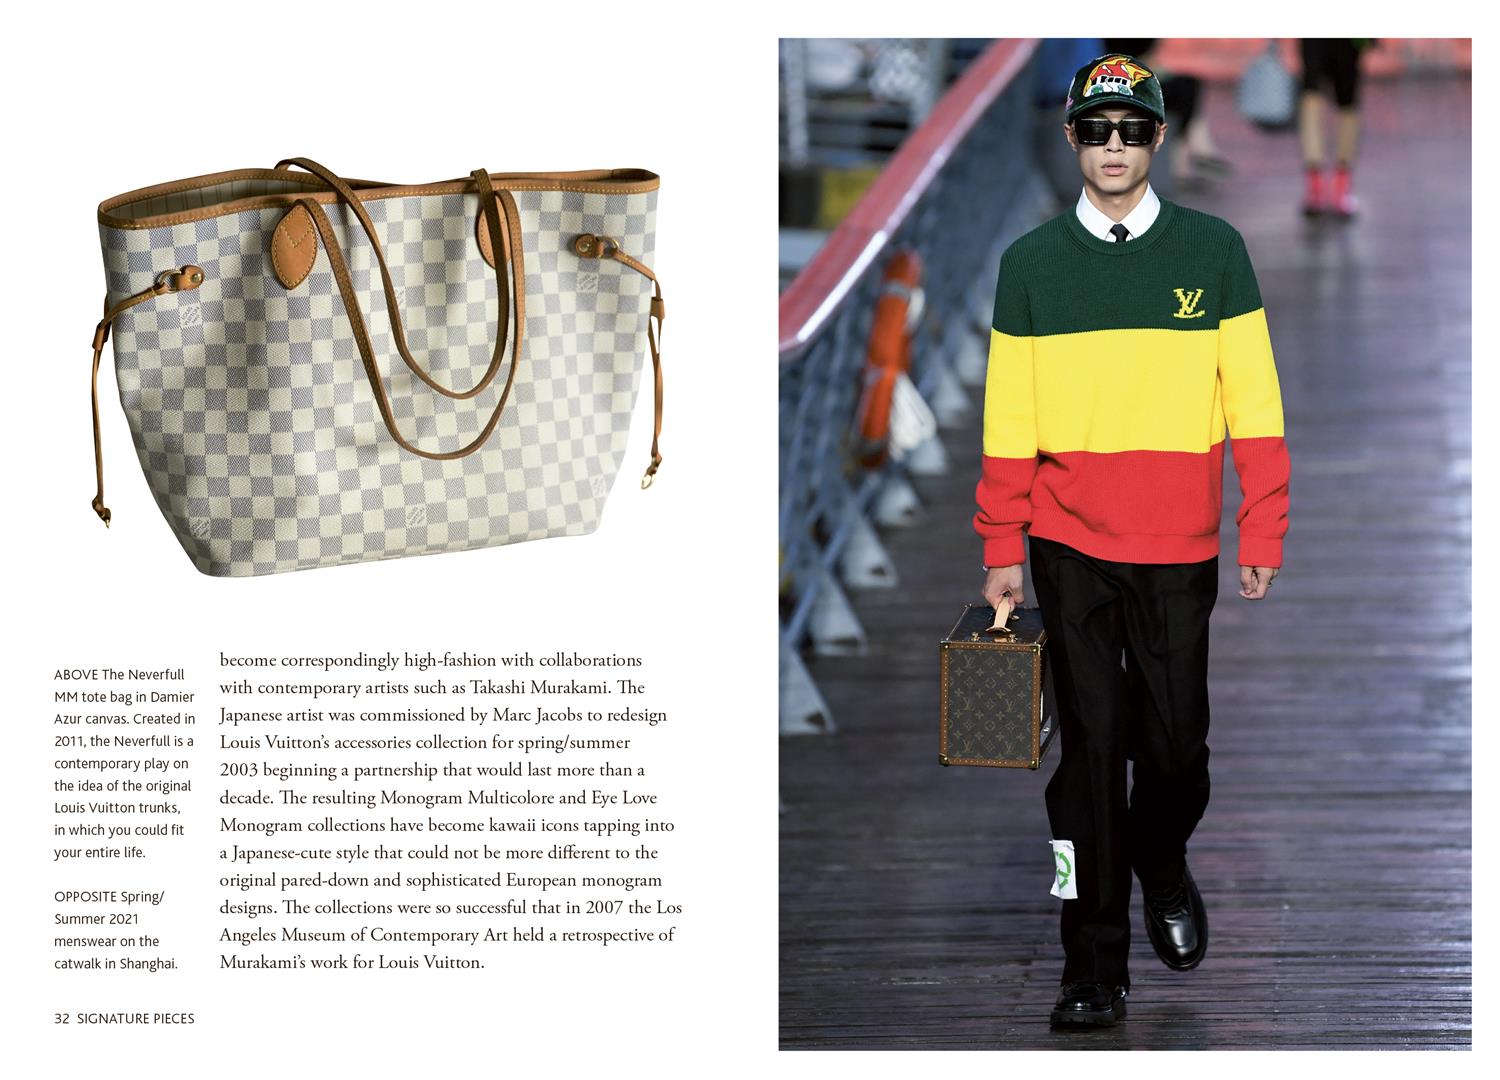 NEW MAGS Little Book Of Louis Vuitton